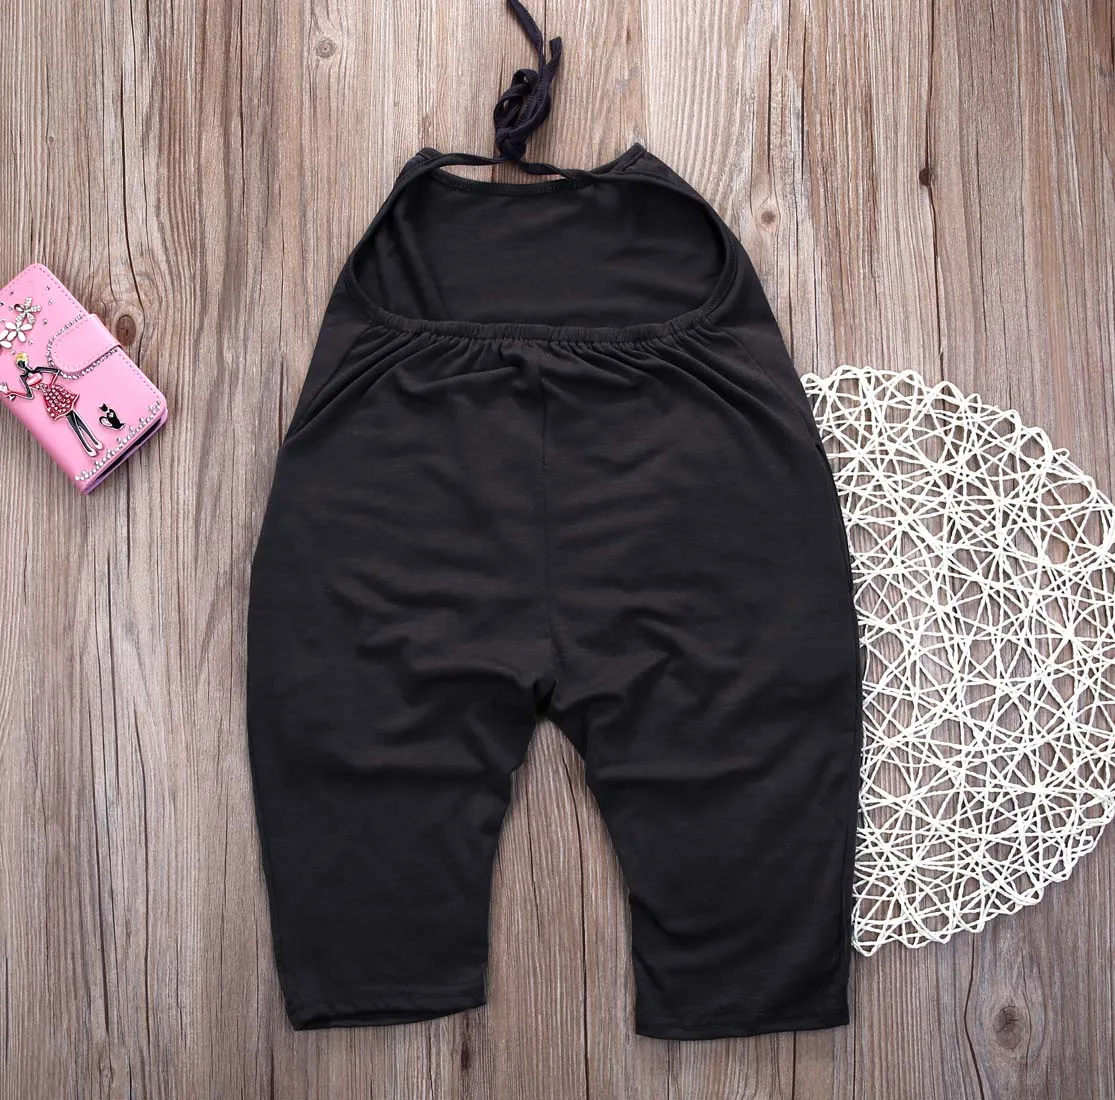 baby clothes cheap Toddler Kids Baby Girls Strap Romper Jumpsuit Harem Pants Trousers Clothes USA Baby Bodysuits expensive